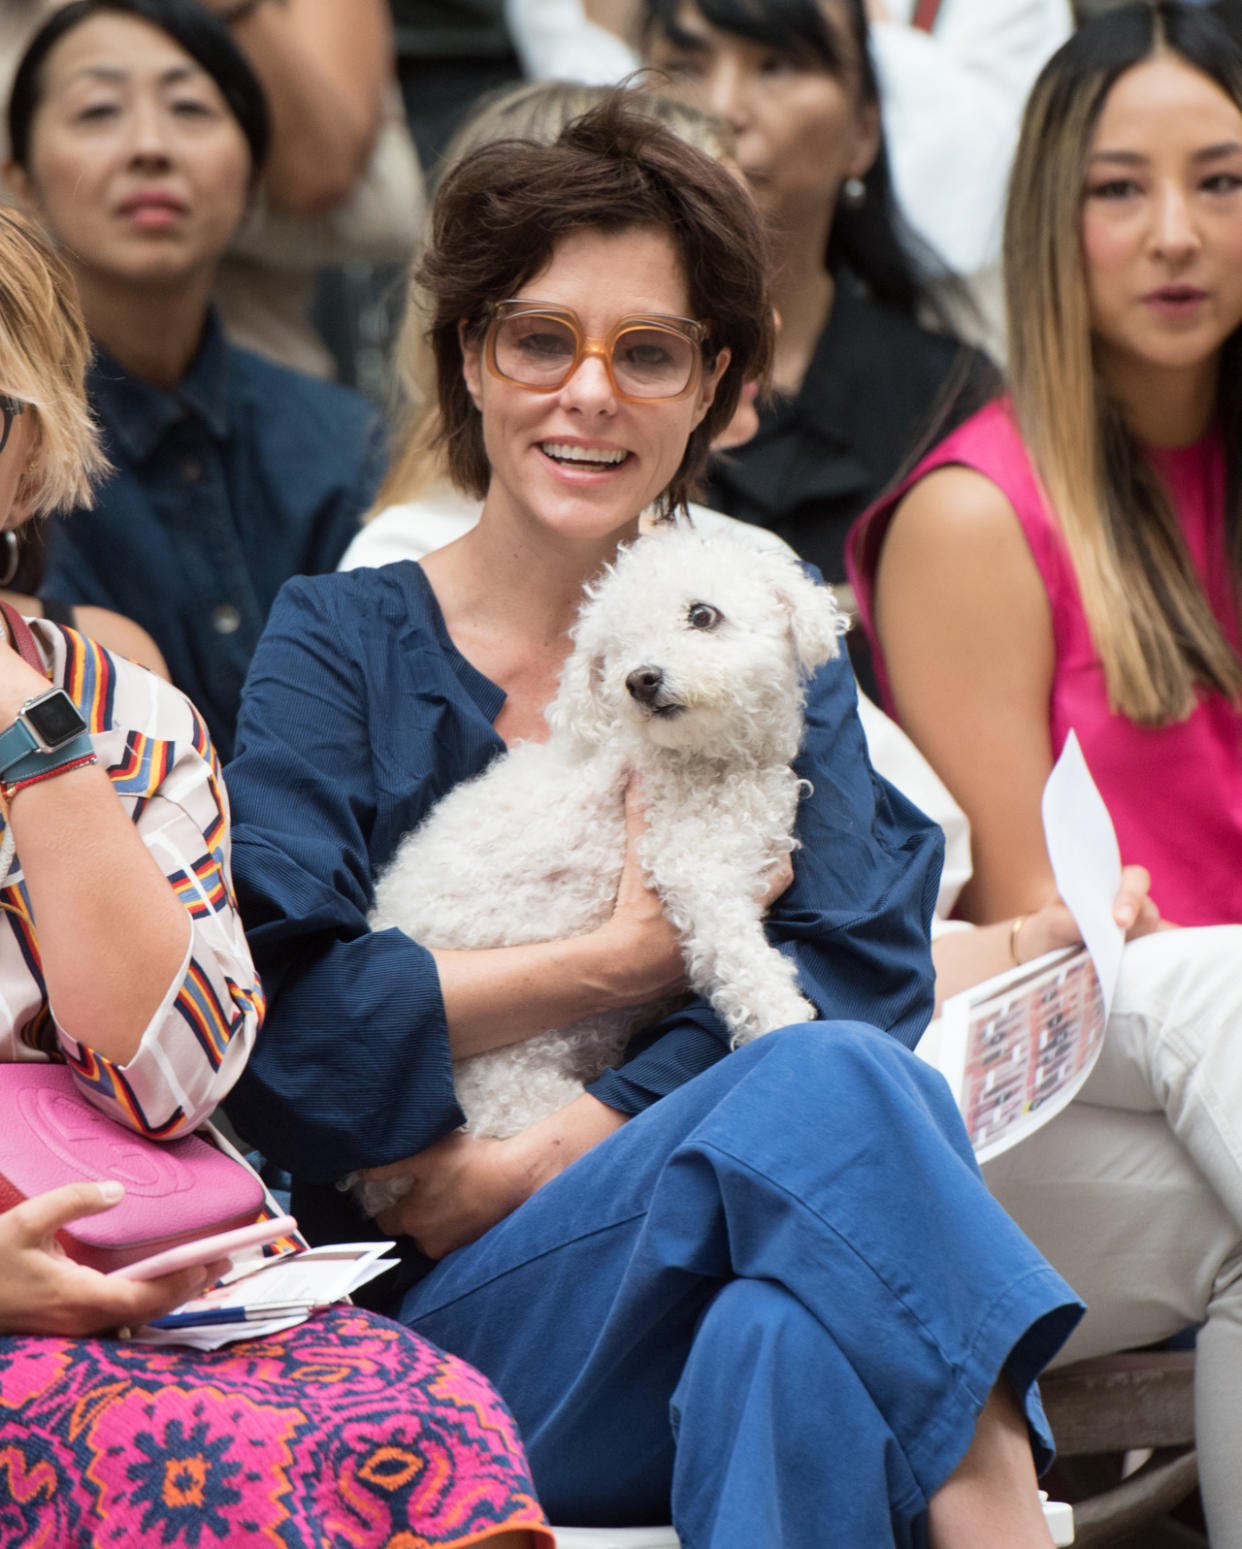 Parker Posey and her pooch in the front row. (Photo: Getty Images